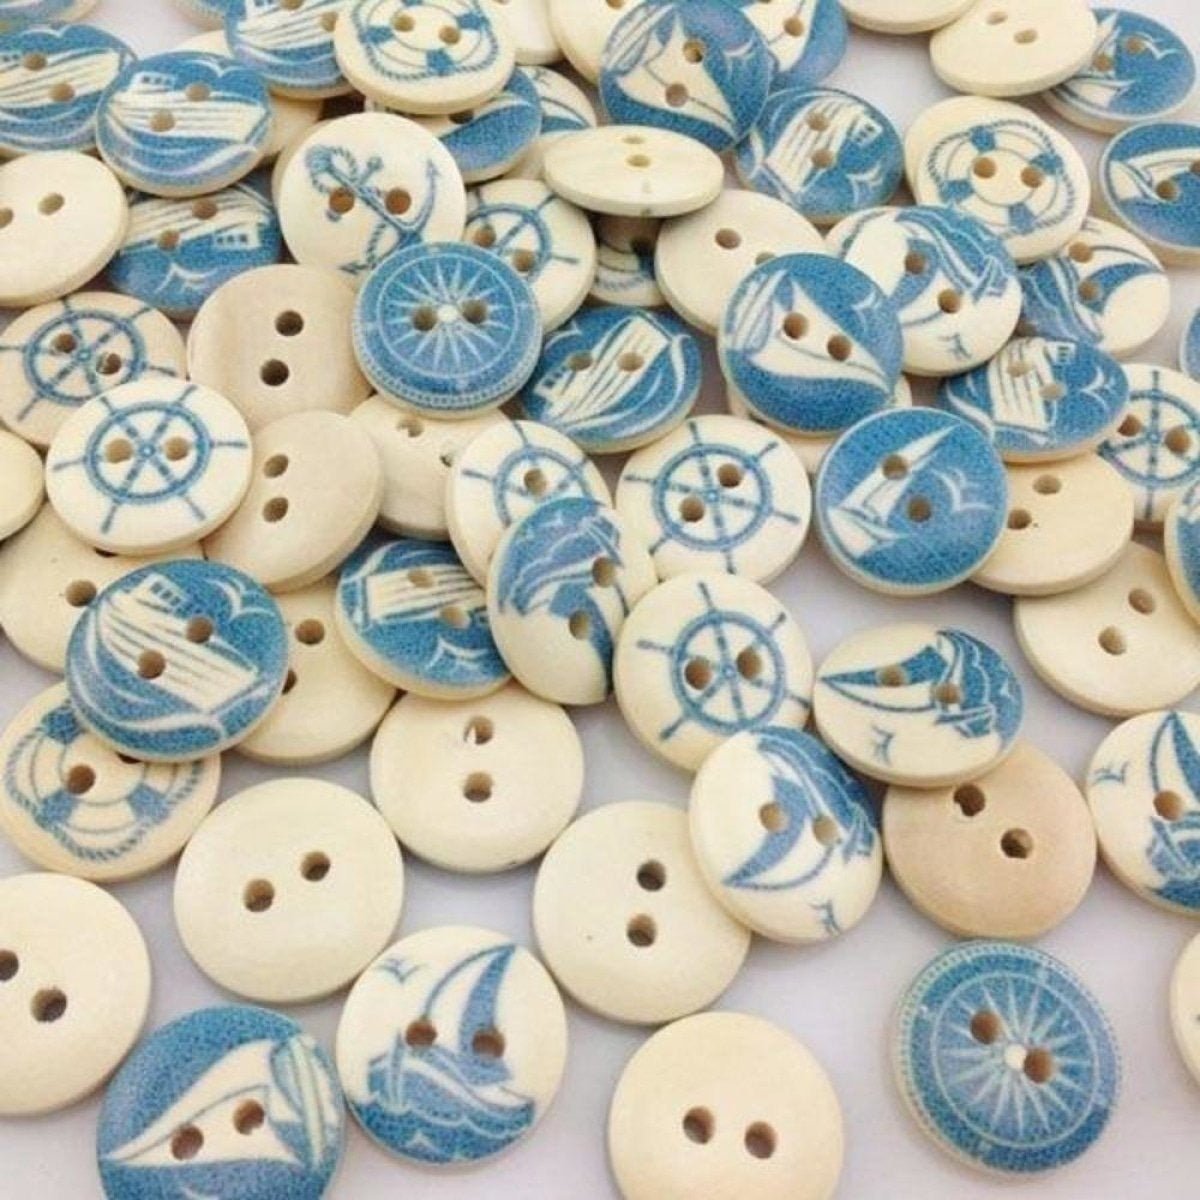 100pcs Mixed Wooden Buttons Flower for Clothing Craft Sewing DIY 2 Hole 15mm - Sailing Blue - - Asia Sell